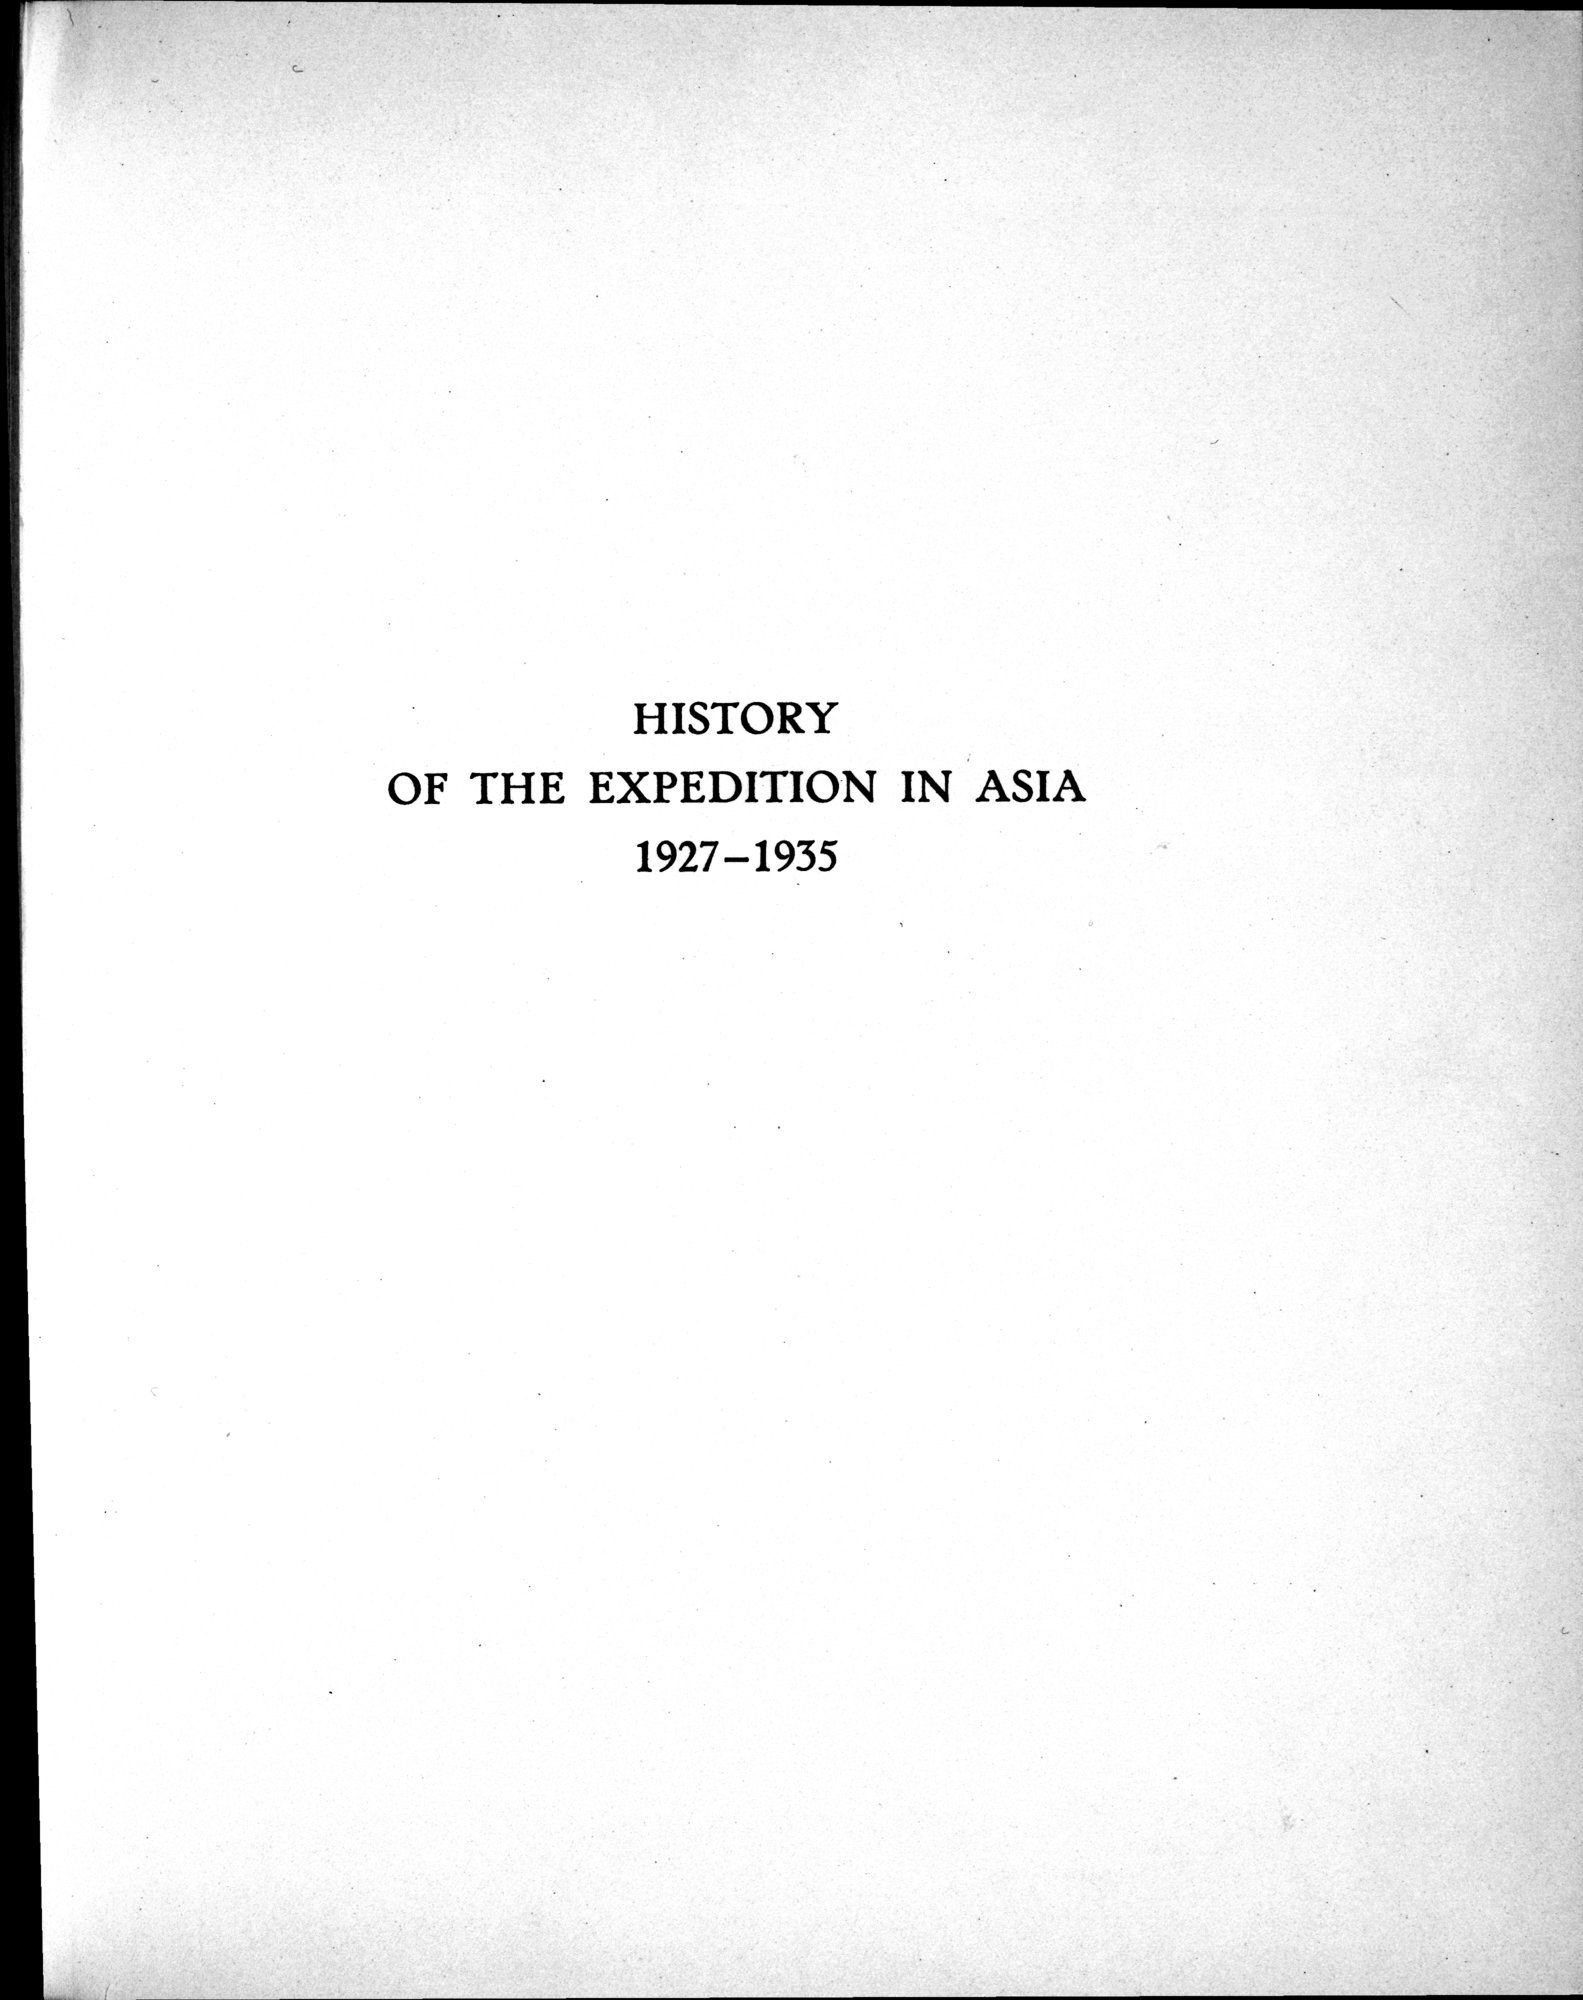 History of the Expedition in Asia, 1927-1935 : vol.1 / Page 9 (Grayscale High Resolution Image)